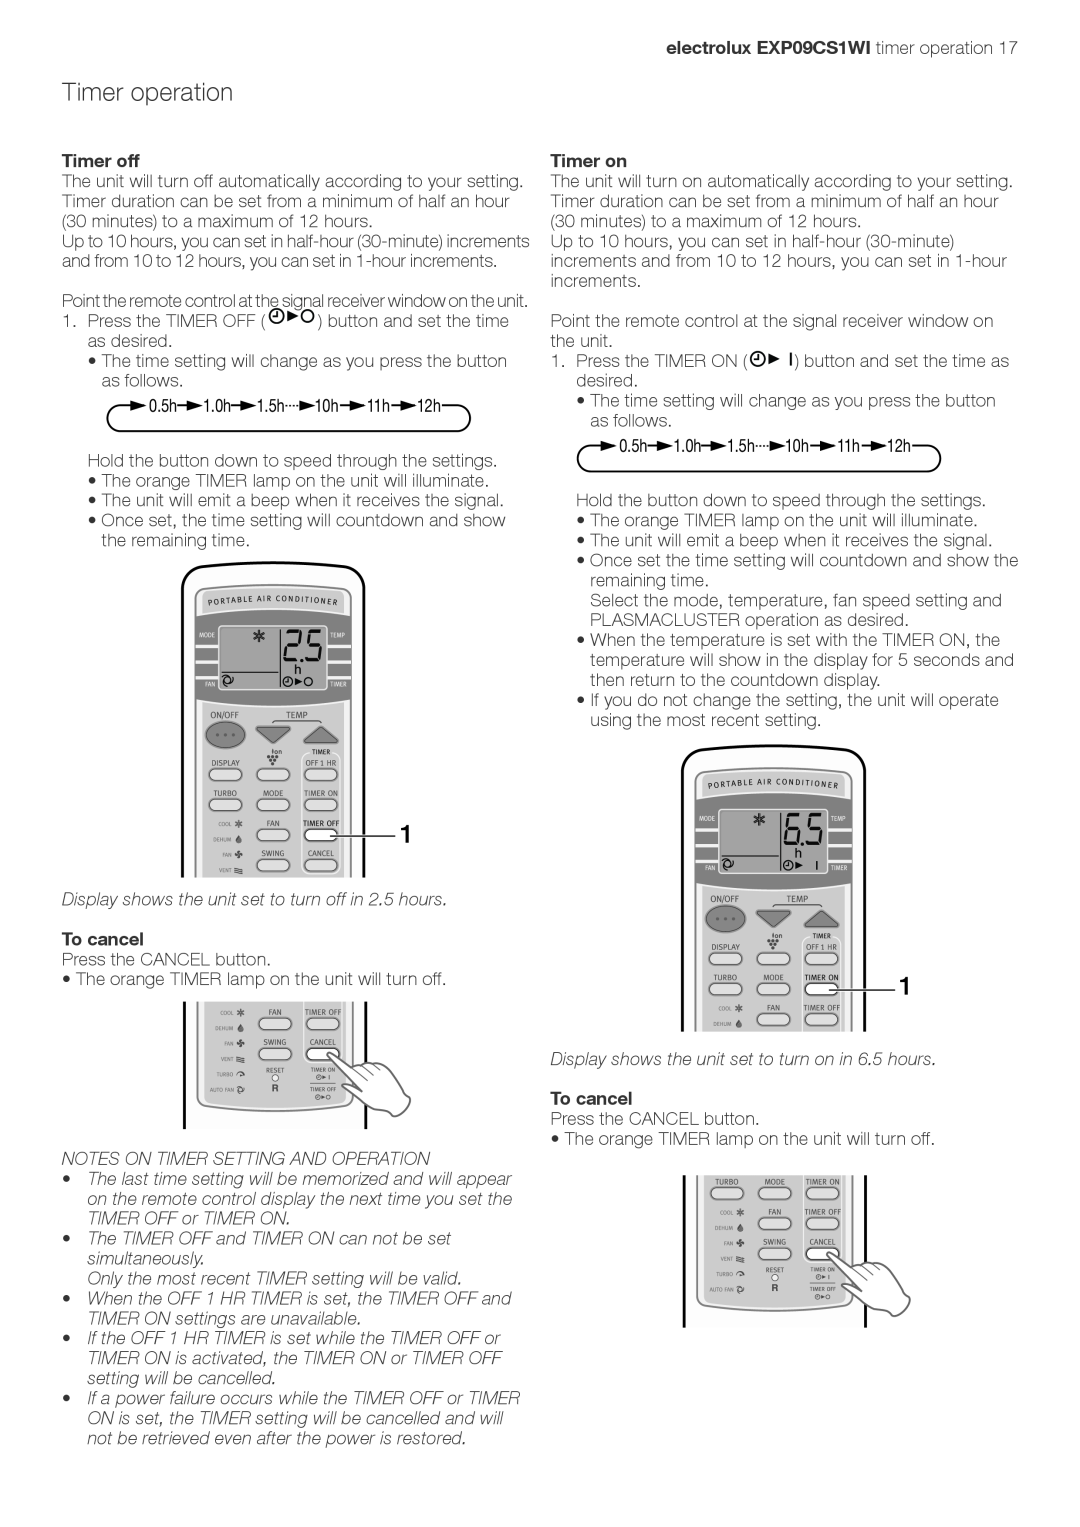 Electrolux LU4 9QQ user manual Timer operation, Timer off, electrolux EXP09CS1WI timer operation Timer on, To cancel 